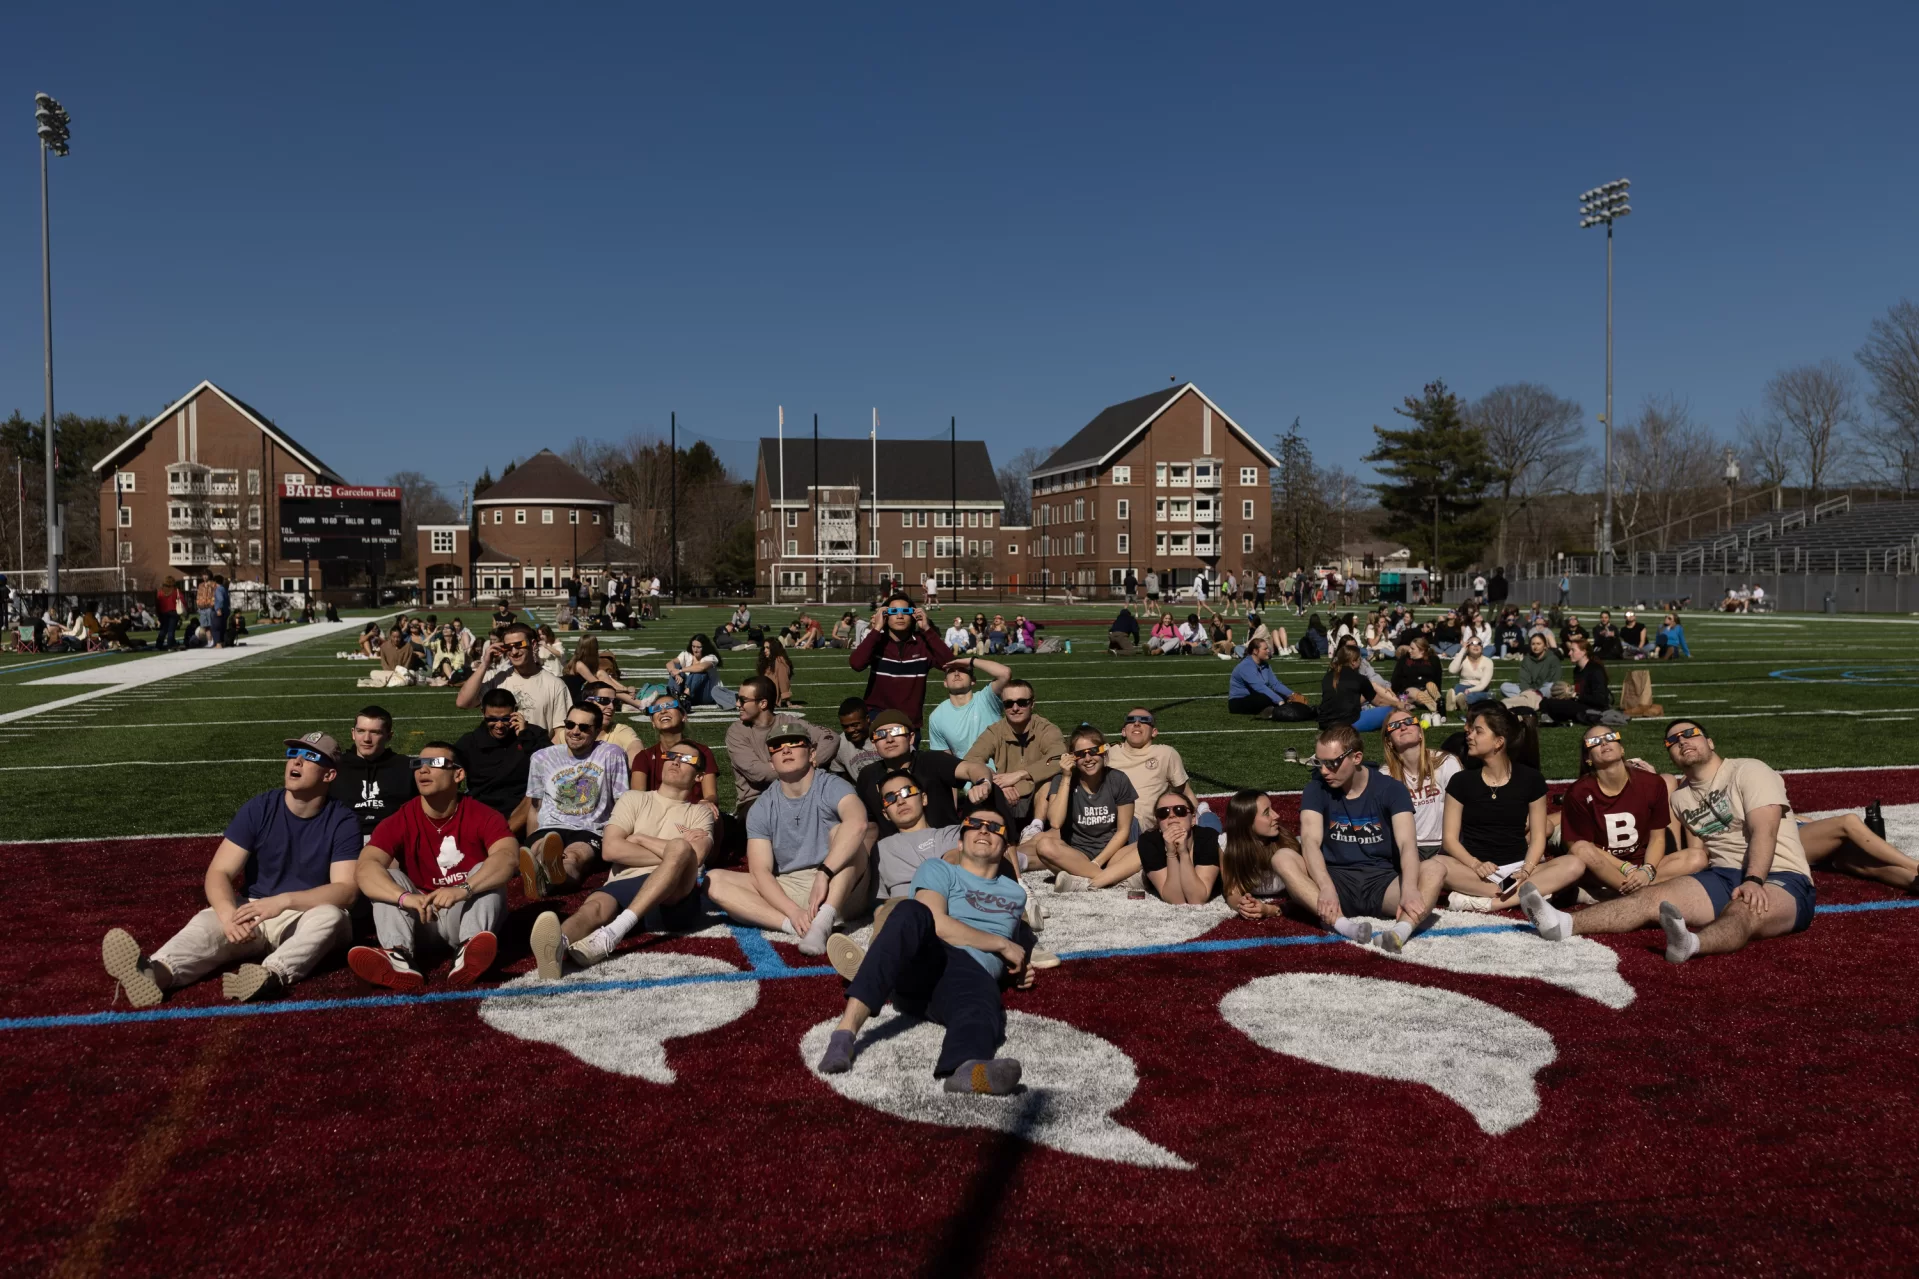 Members of the Bates community gathered around campus this afternoon for the April 8, 2024 solar eclipse as the moon obscured the sun, beginning at 2:20 p.m. and reaching maximum coverage of 96.5% at 3:31 p.m.

Faculty, staff, students, and families with newly admitted students participating in today’s Admission program, Bates Beginnings (and what a way to kick off your Bates experience), observed in awe and delight as the phenomenon played out.

Skies darkened, smiles brightened, and temperatures (noticeably!) dropped. New memories were made.

Unforgettable. Swipe left. You won’t see the eclipse. But you will see those who watched it.